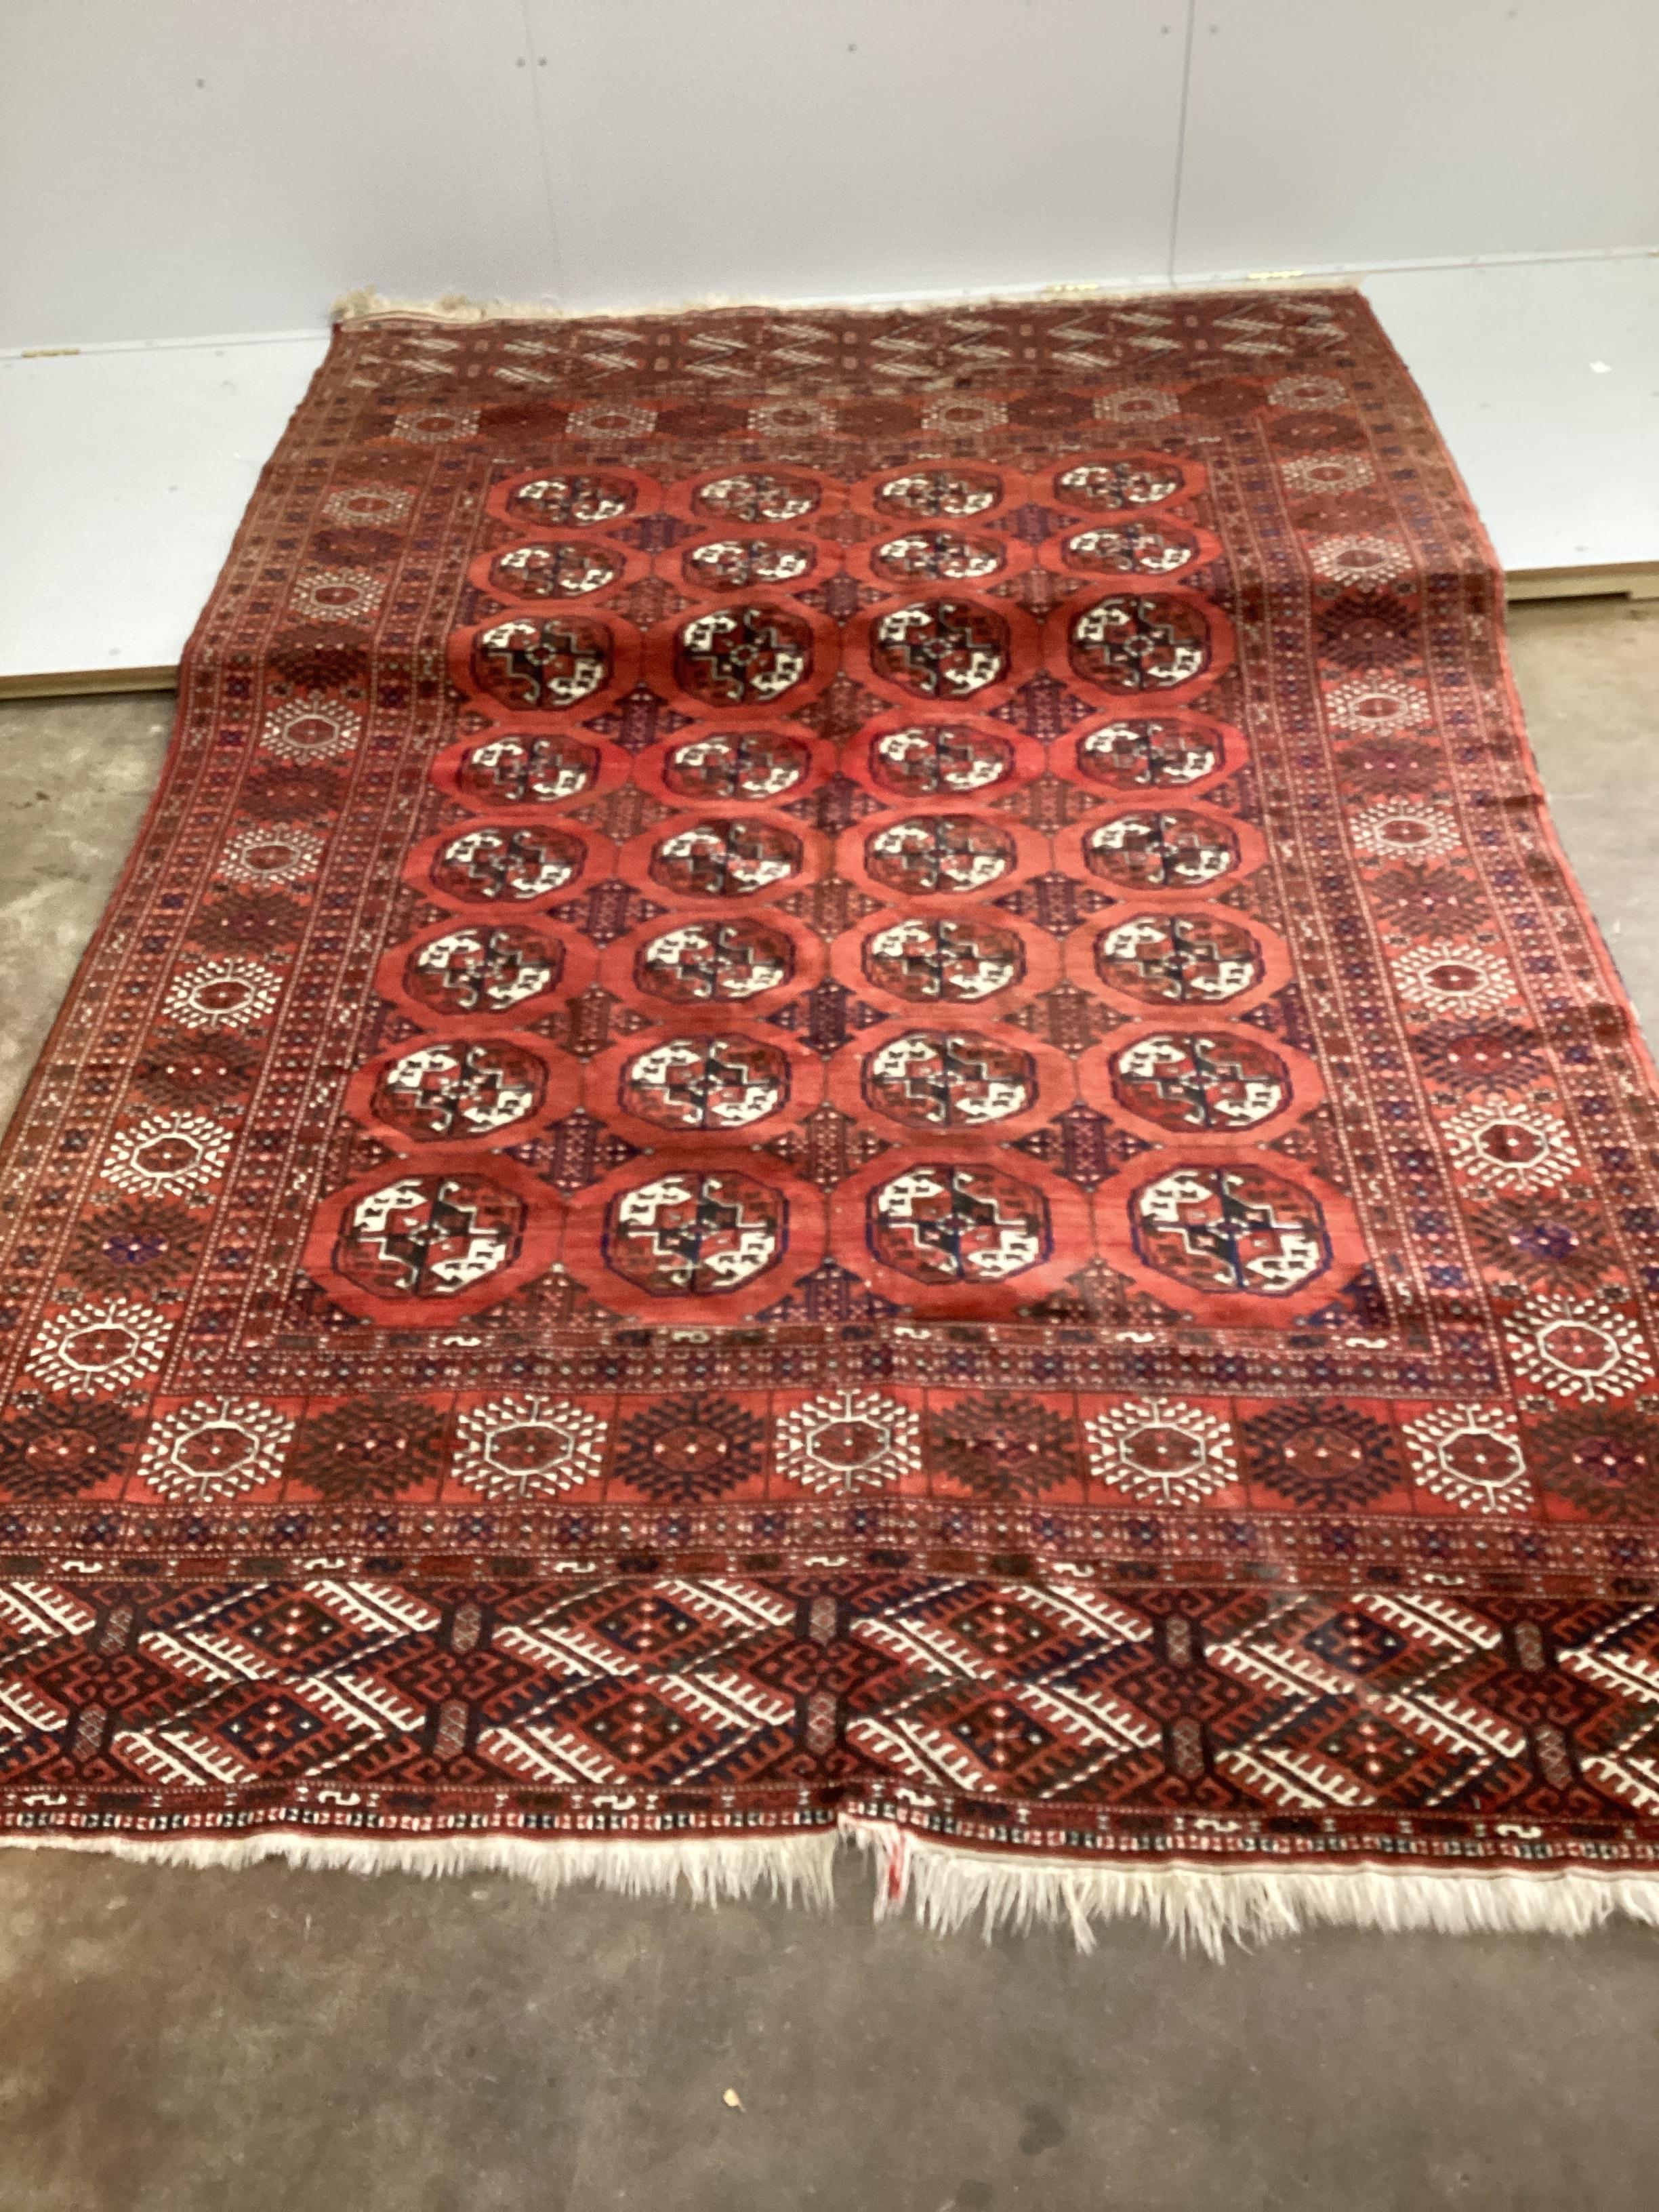 A Bokhara red ground carpet, woven with rows of elephants foot, 308 x 203cm (Worn at one end)